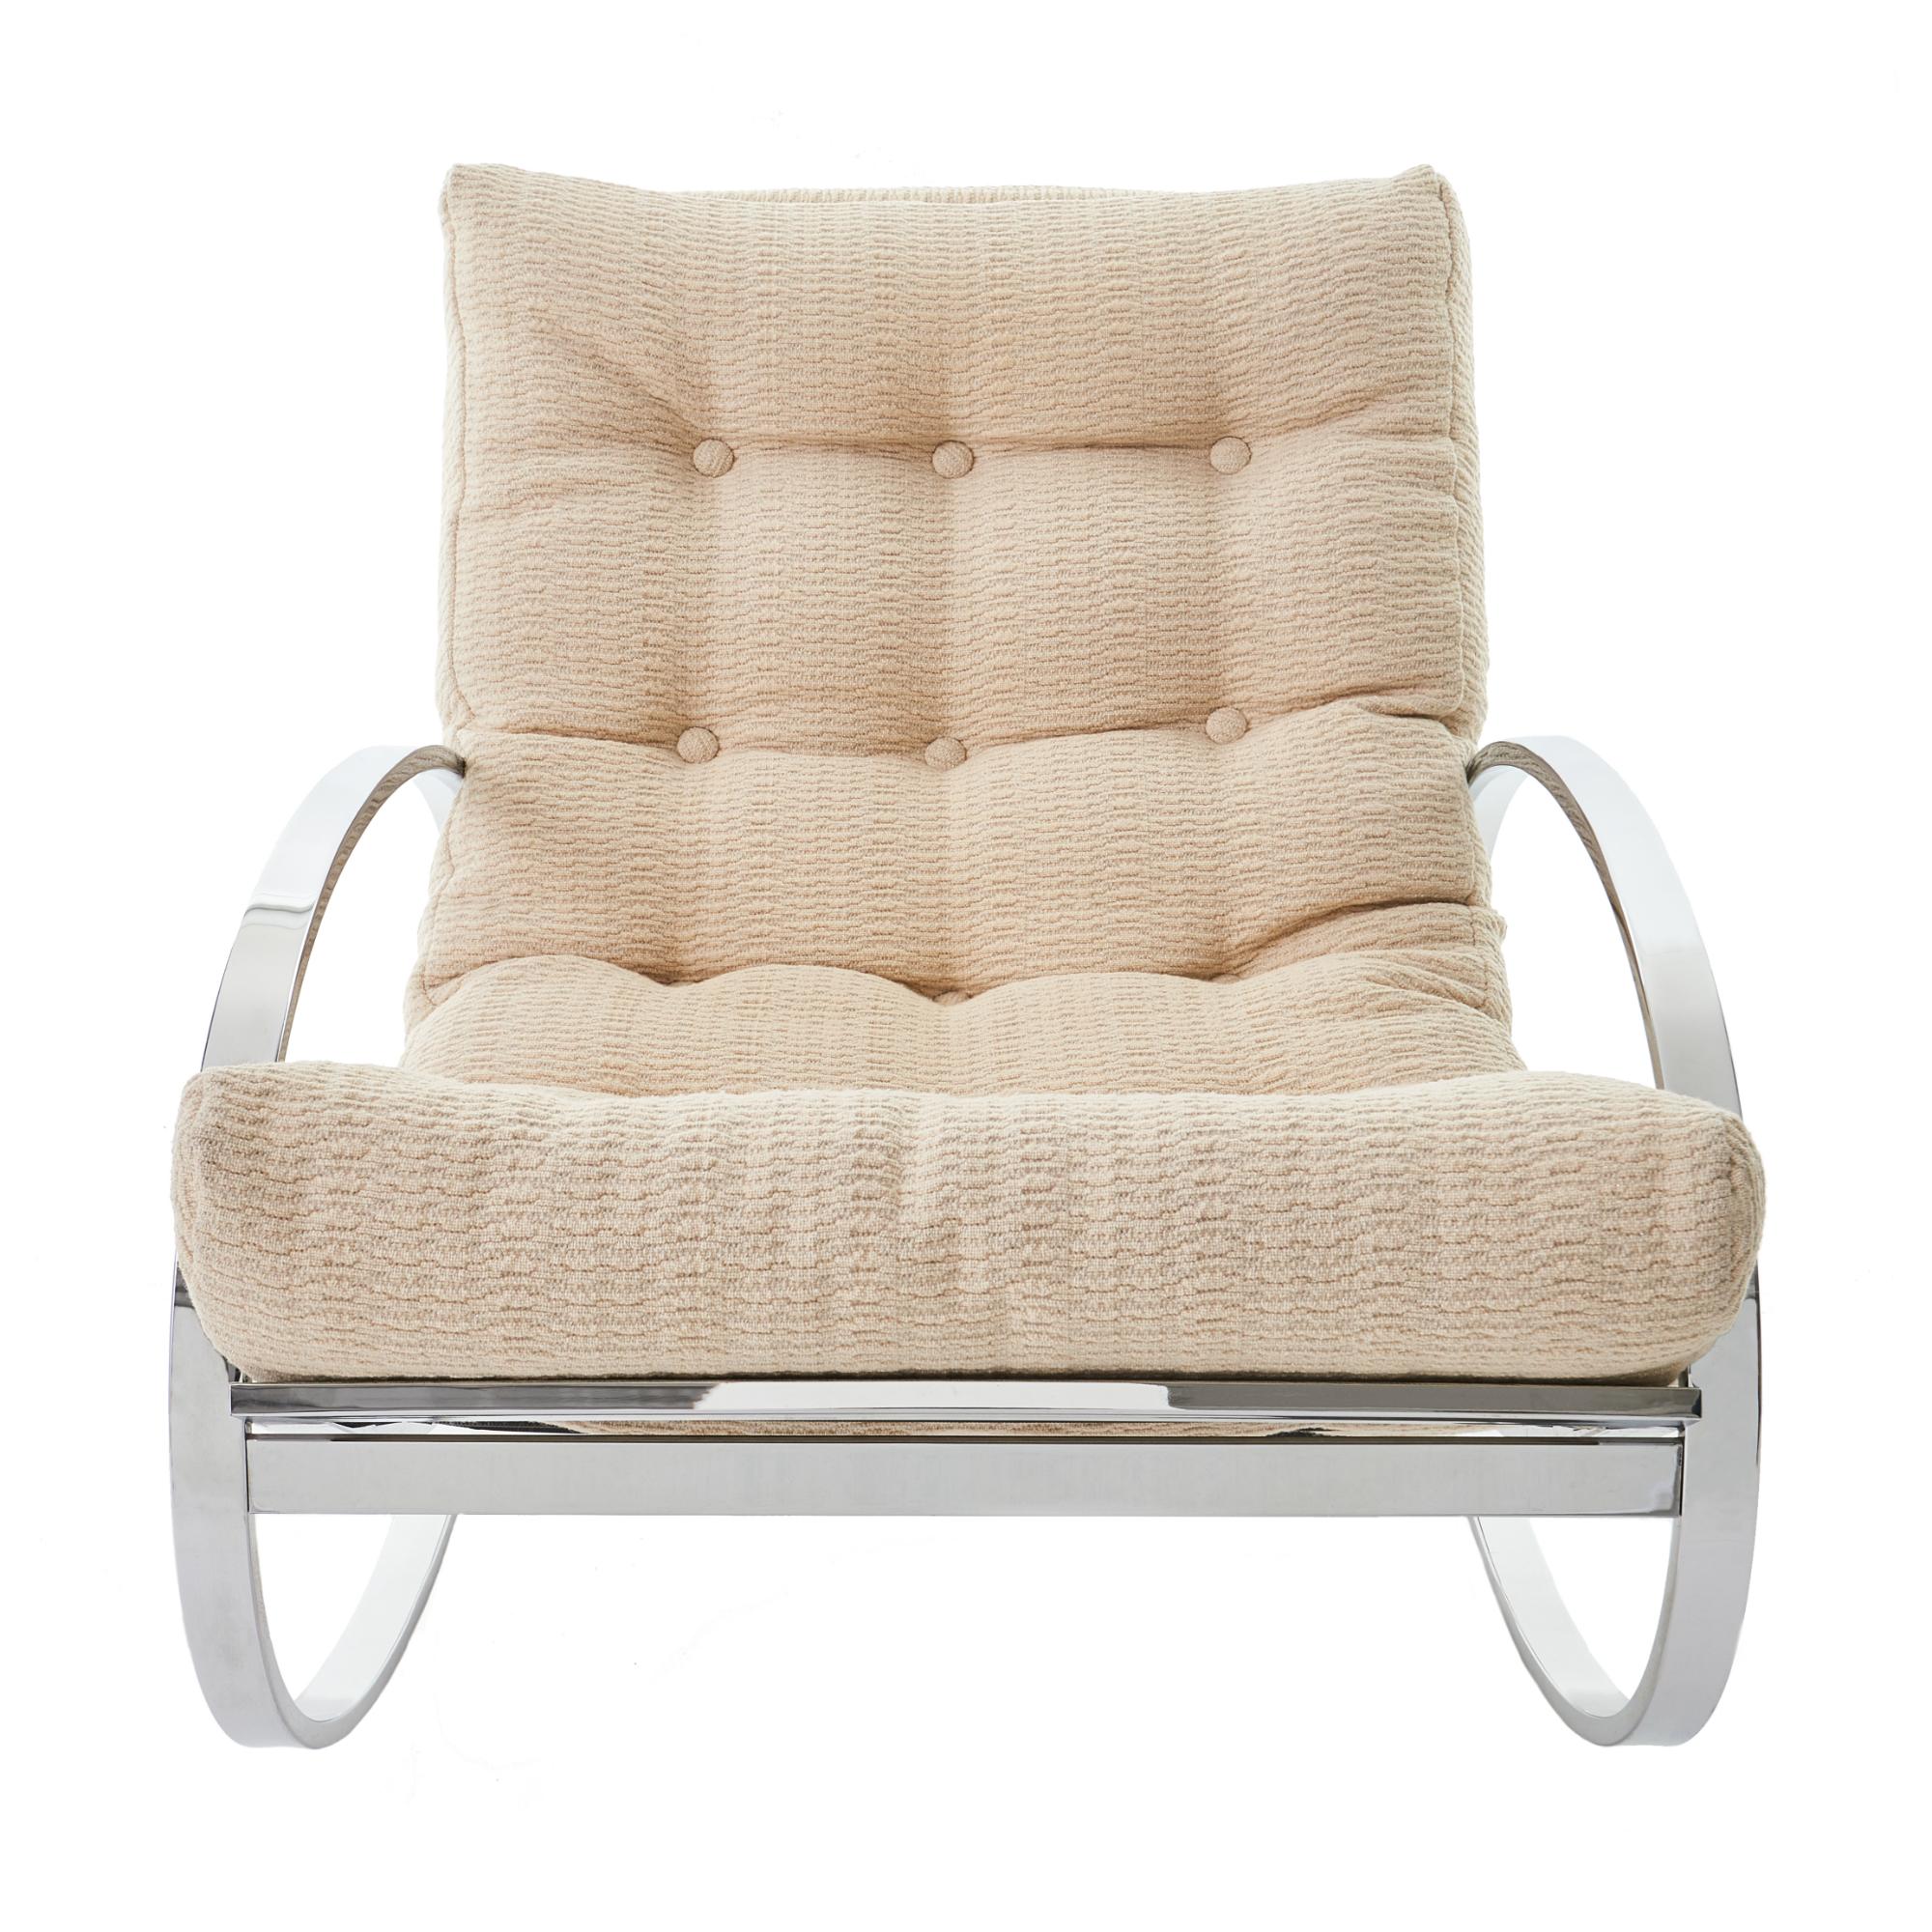 Gorgeous Mid-Century Modern chrome 'Ellipse' rocking chair designed by Renato Zevi for Selig. Sleek and glamorous design, featuring a polished chrome oval frame and original cream colored upholstered seat. 

Measures: H 31 in. x W 27.5 in. x D 41